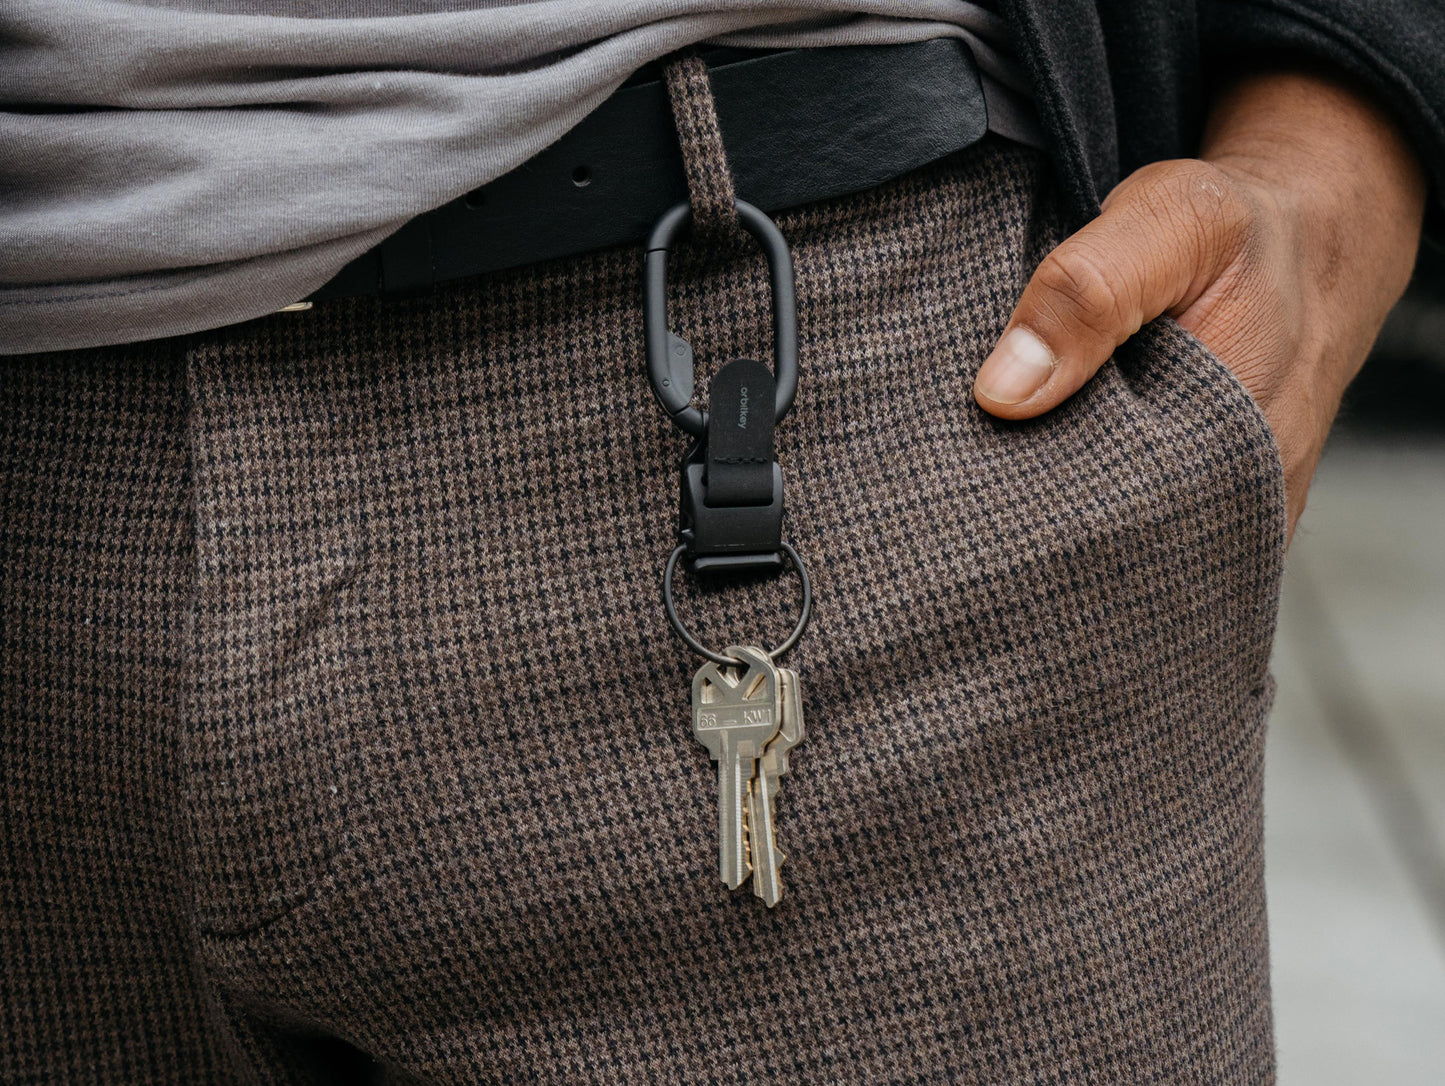 OrbitKey AirTag cases review: Cool contraptions for your keys